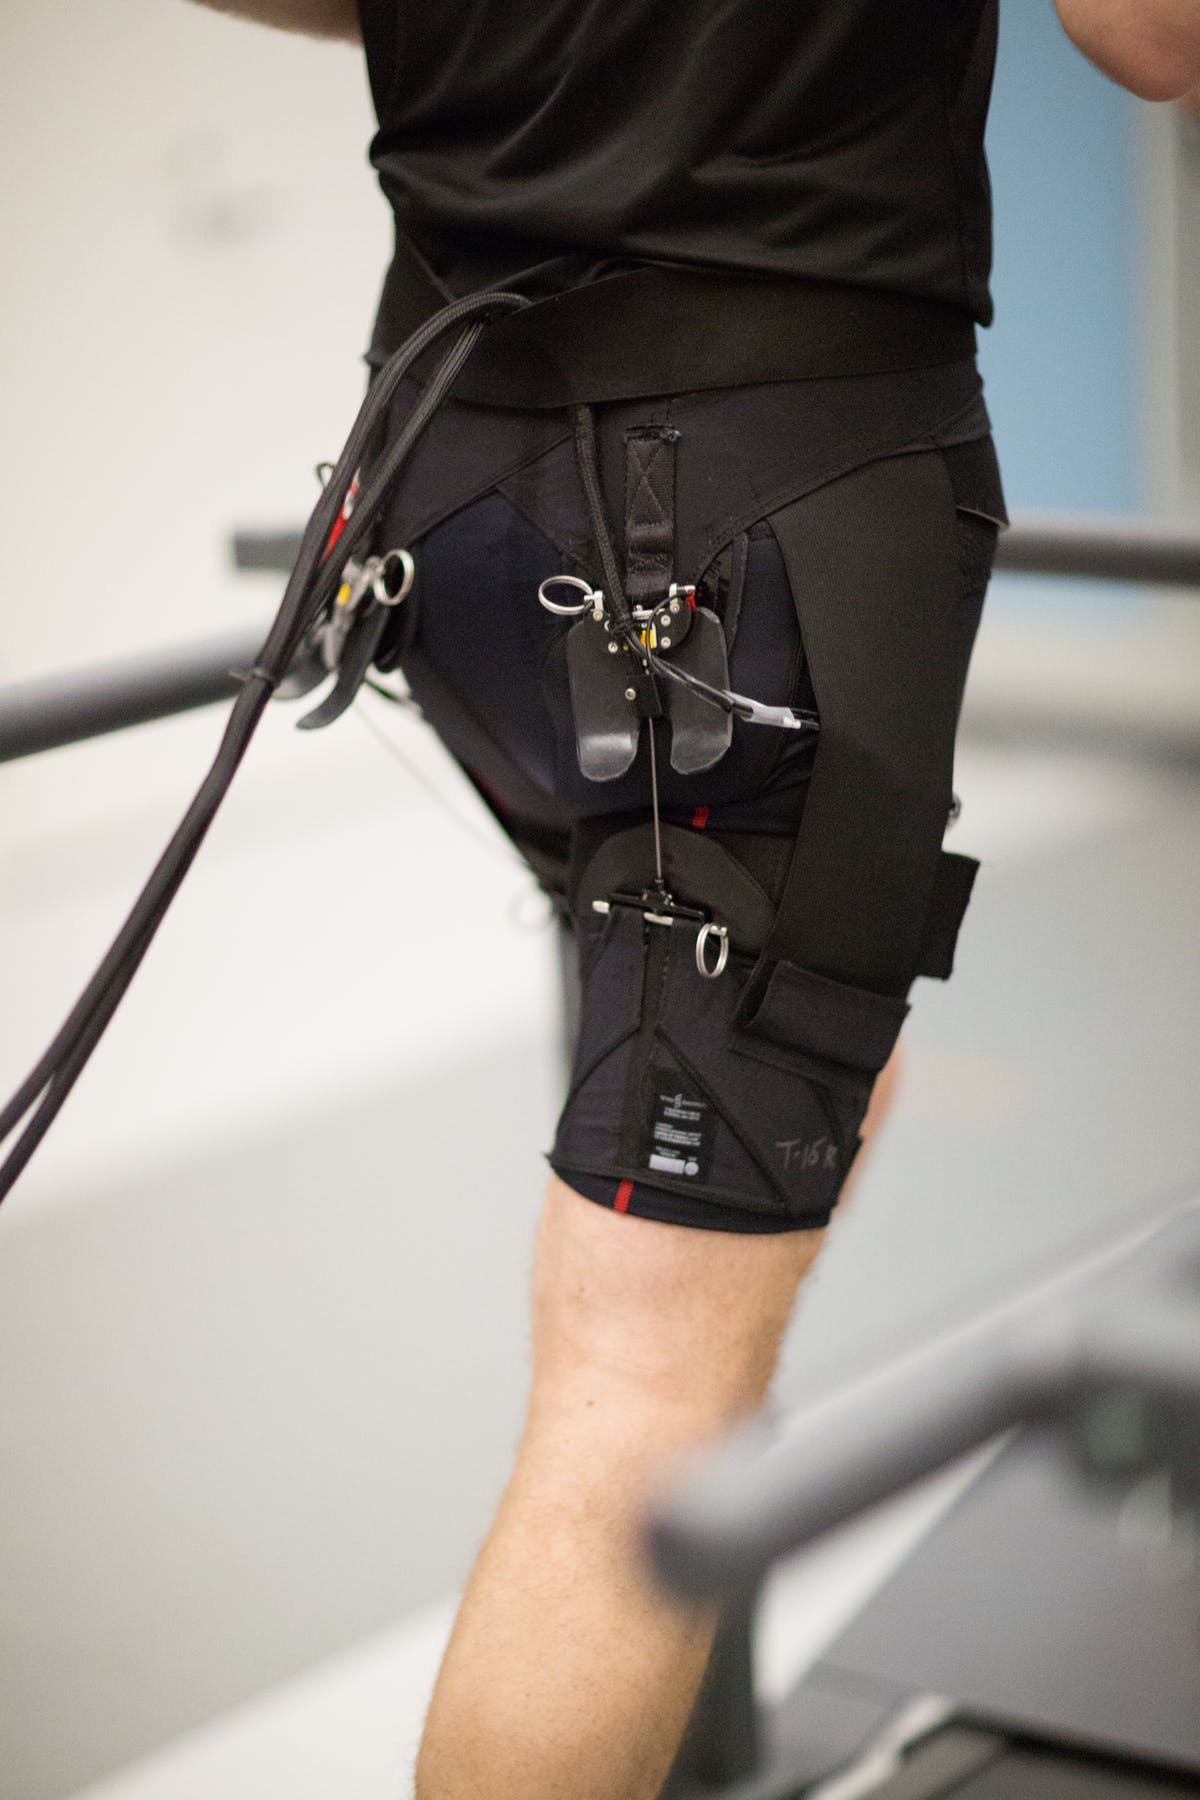 This Robotic Exosuit Could Turn You Into A Super Athlete